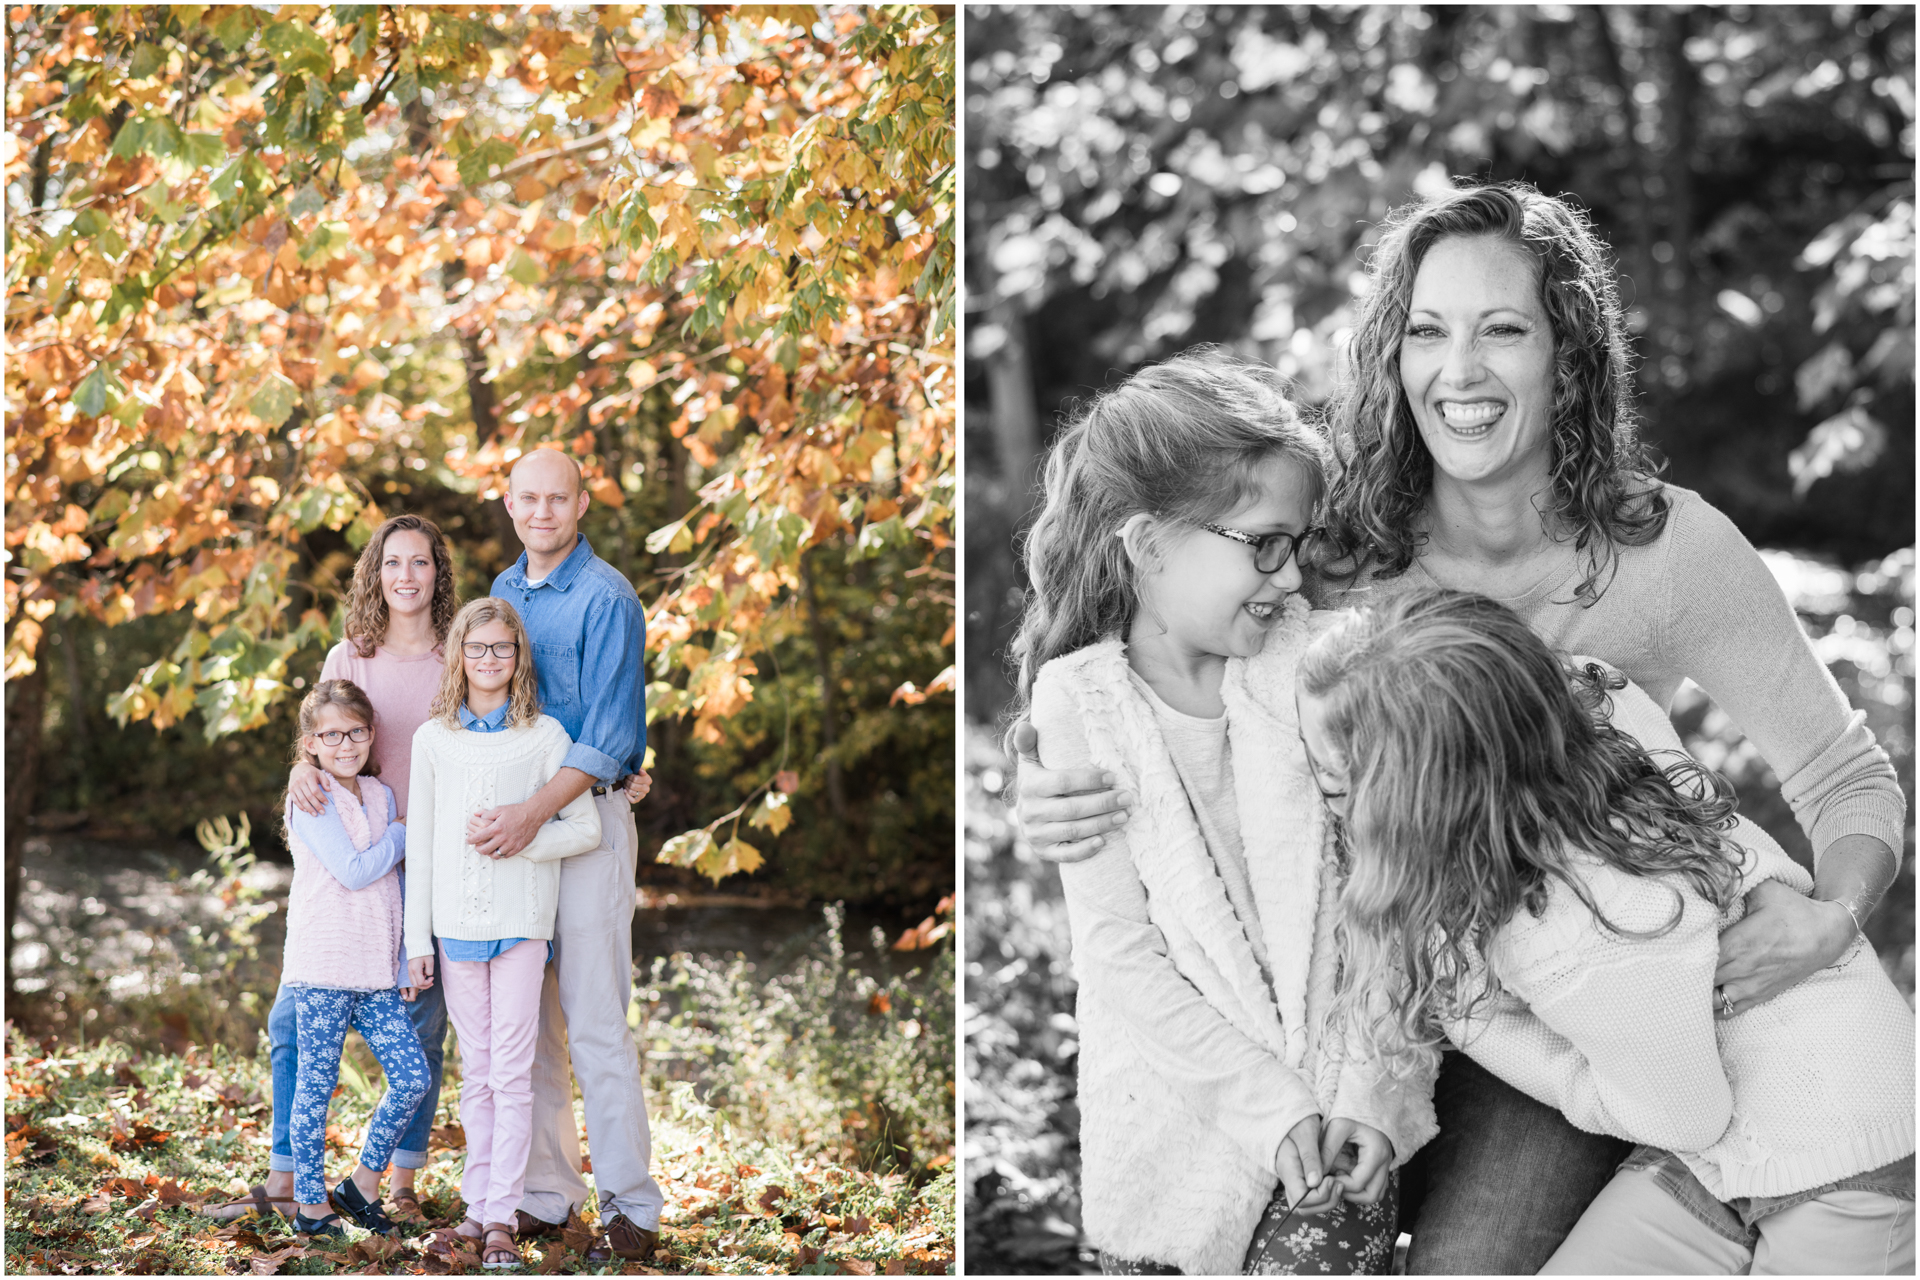 Athens Alabama Family Photographer - Fall Family Session - Swan Creek Greenway